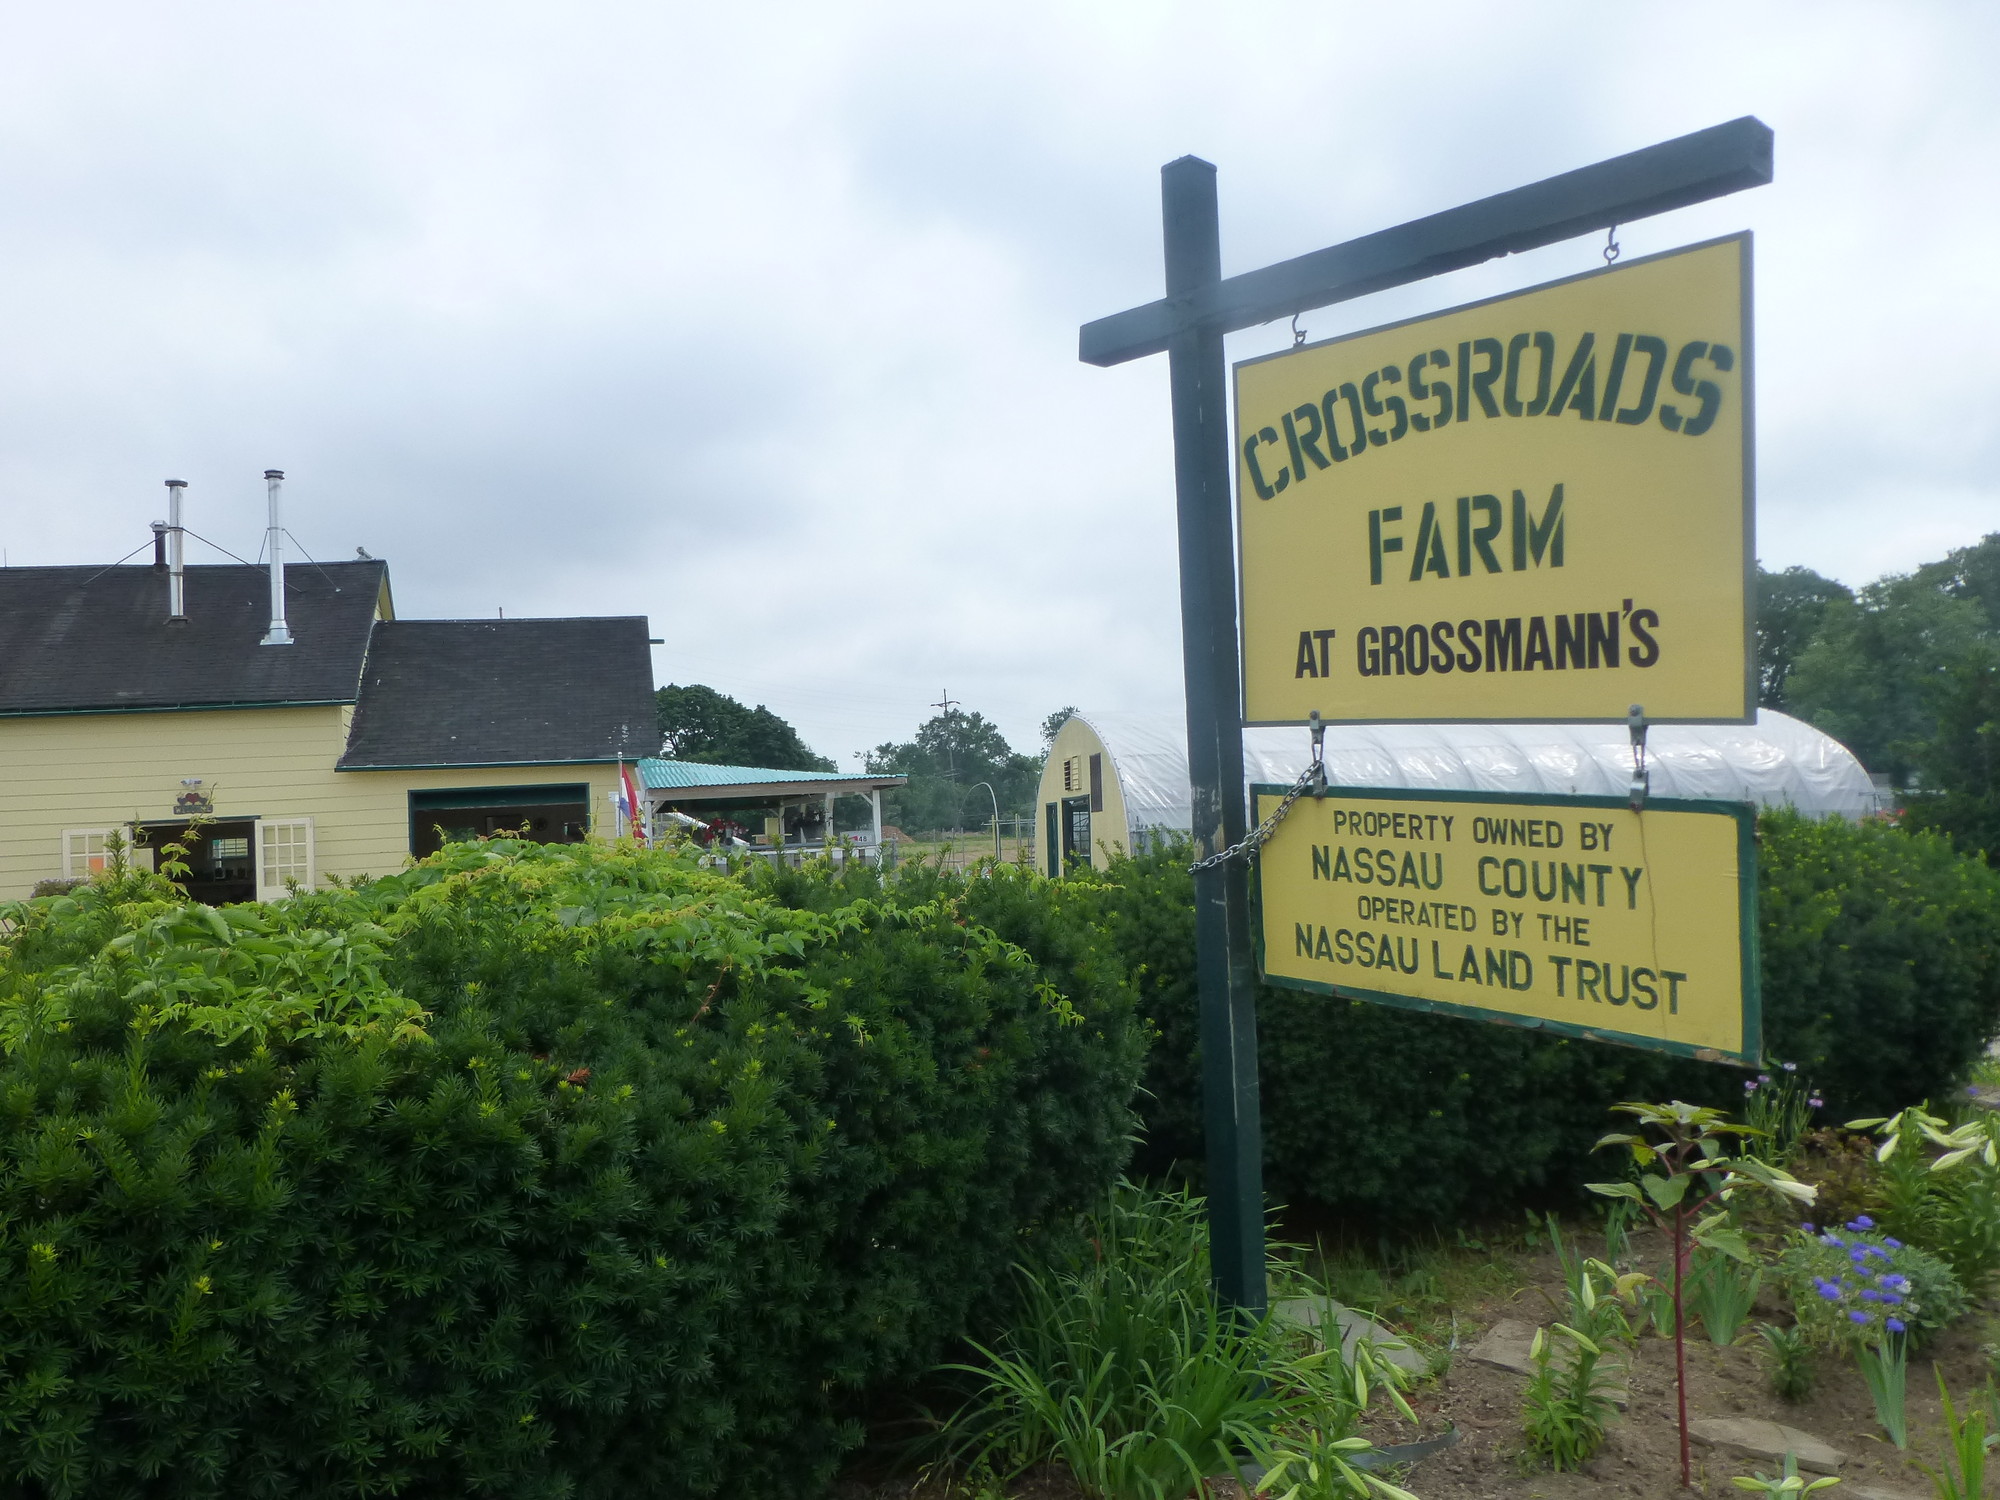 The Nassau Land Trust purchased a parcel of the Grossmann’s property in 2010 to conserve the farmland and establish Crossroads, the last farm in southern Nassau County.